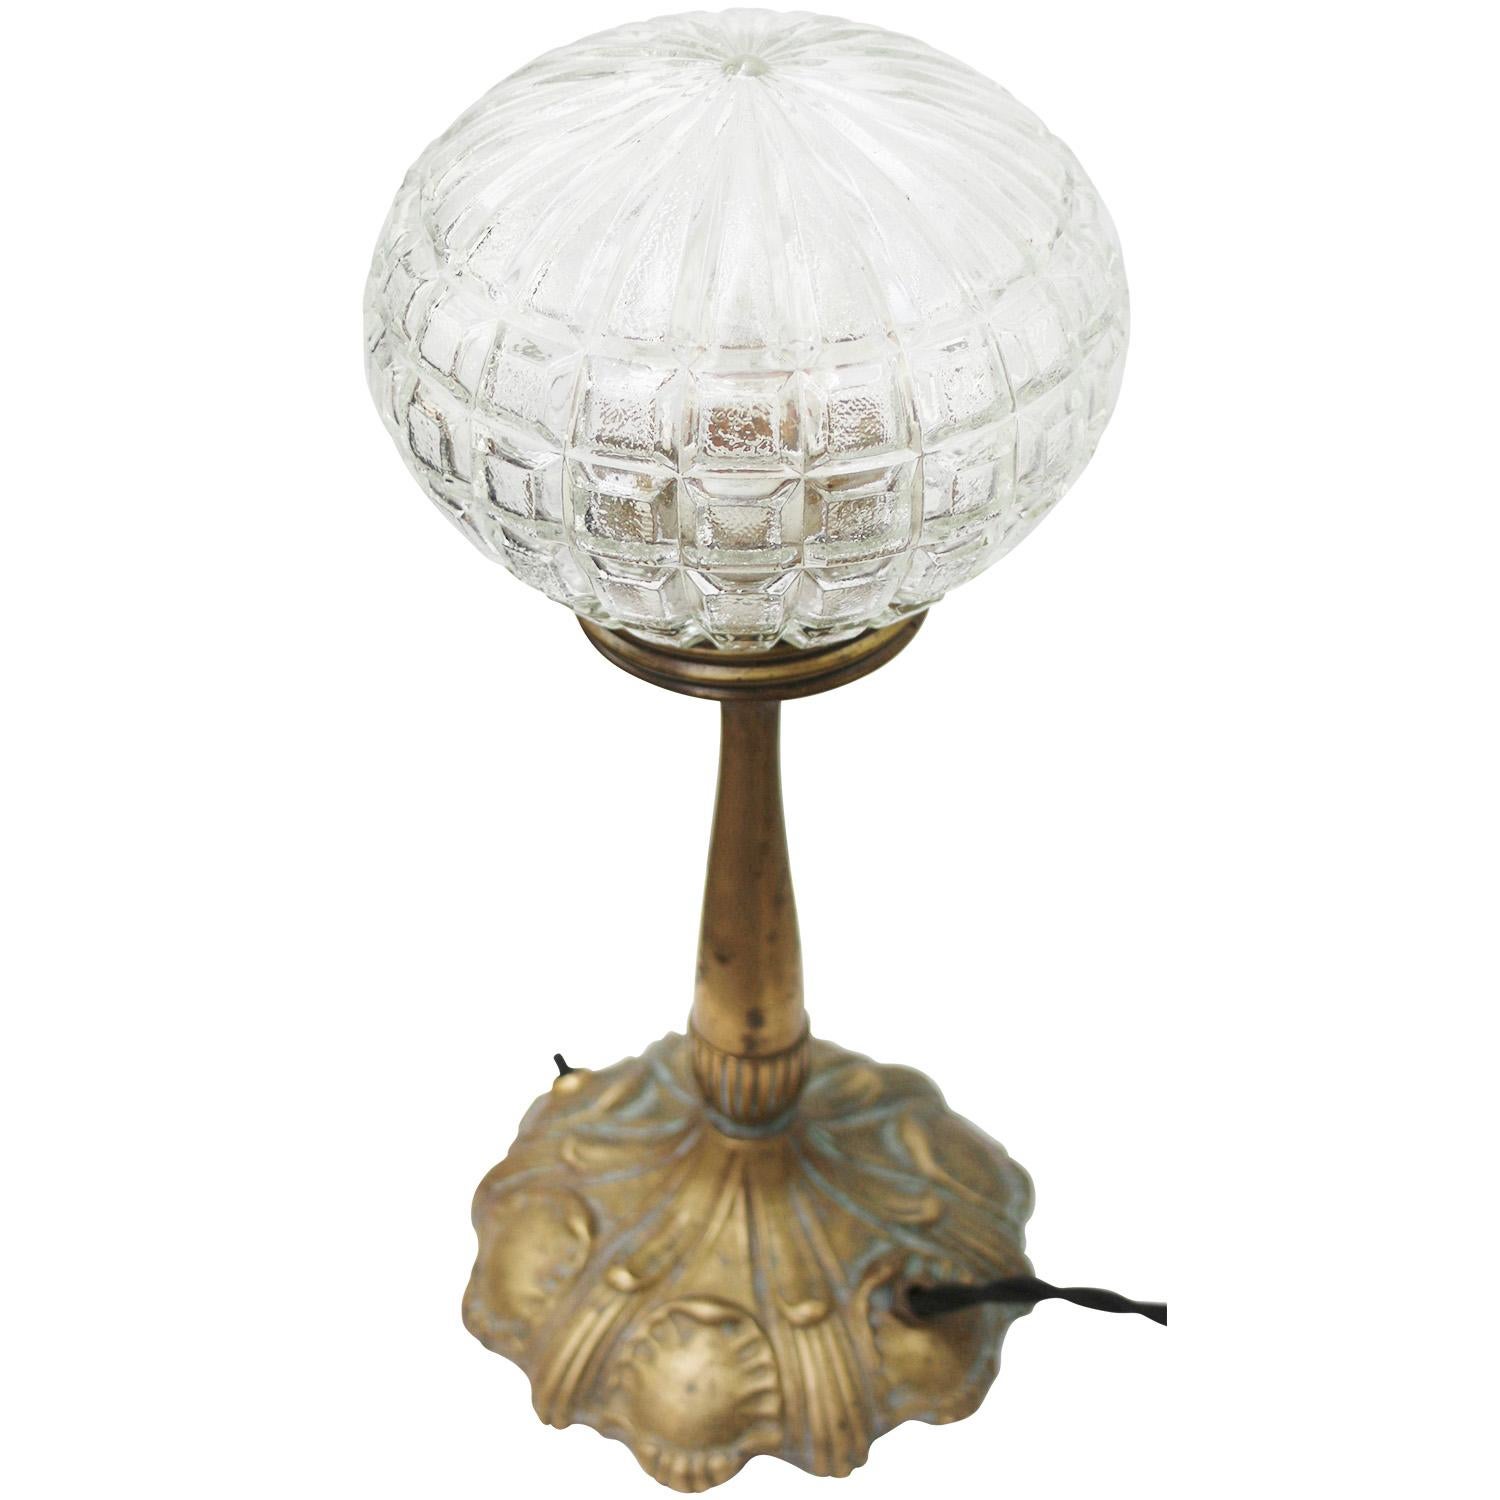 Brass tabel desk lamp with glass globe. ca. 1920

2,5 meter black cotton flex with plug and switch in base

Available with US/UK plug

Priced per individual item. All lamps have been made suitable by international standards for incandescent light